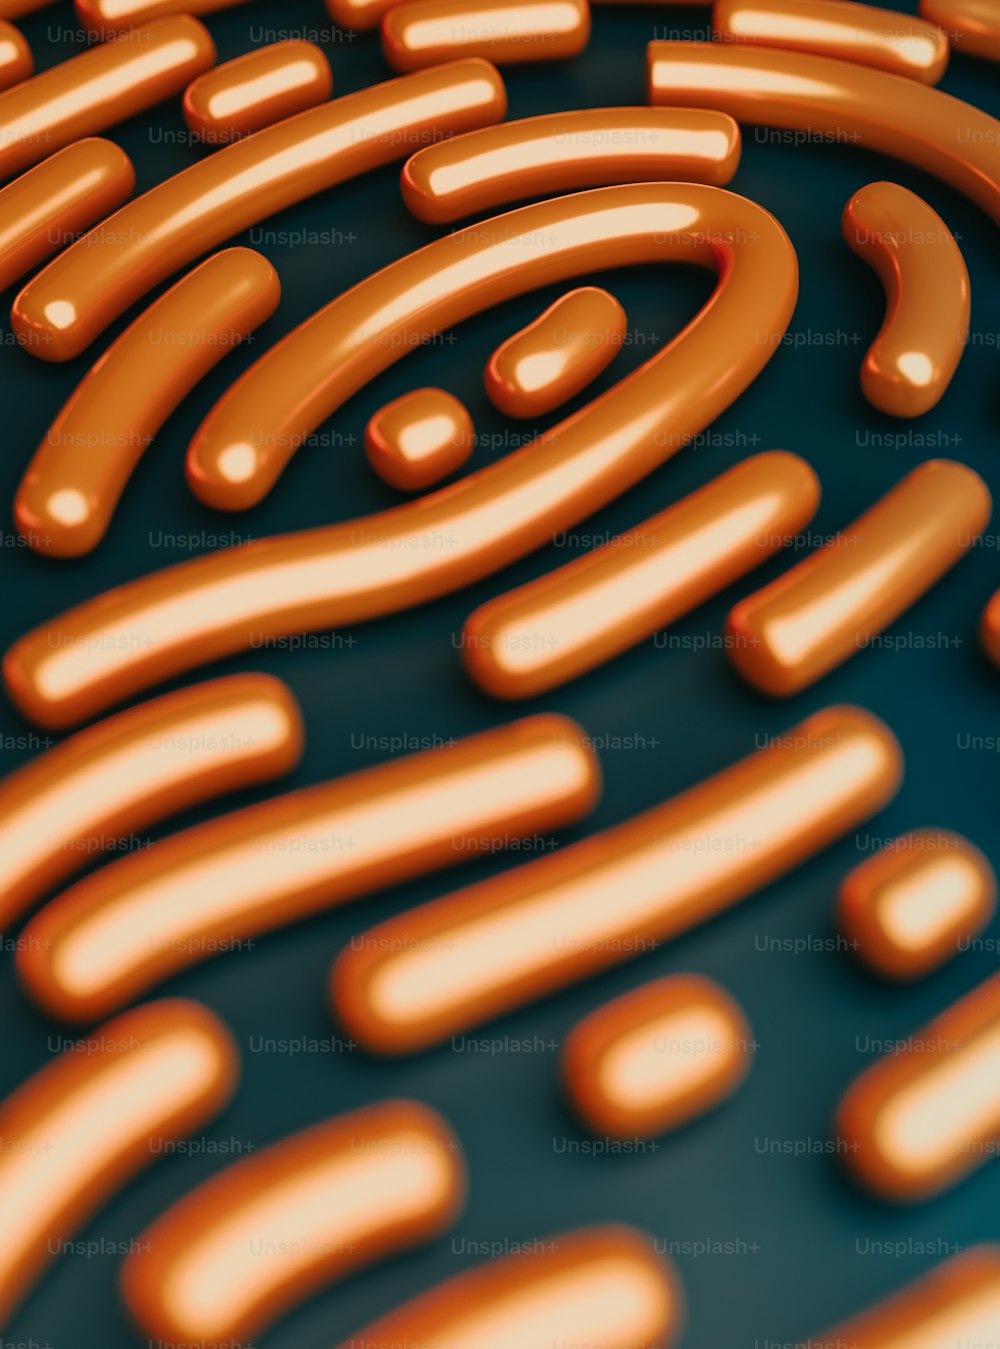 a close up of a pattern made out of orange circles